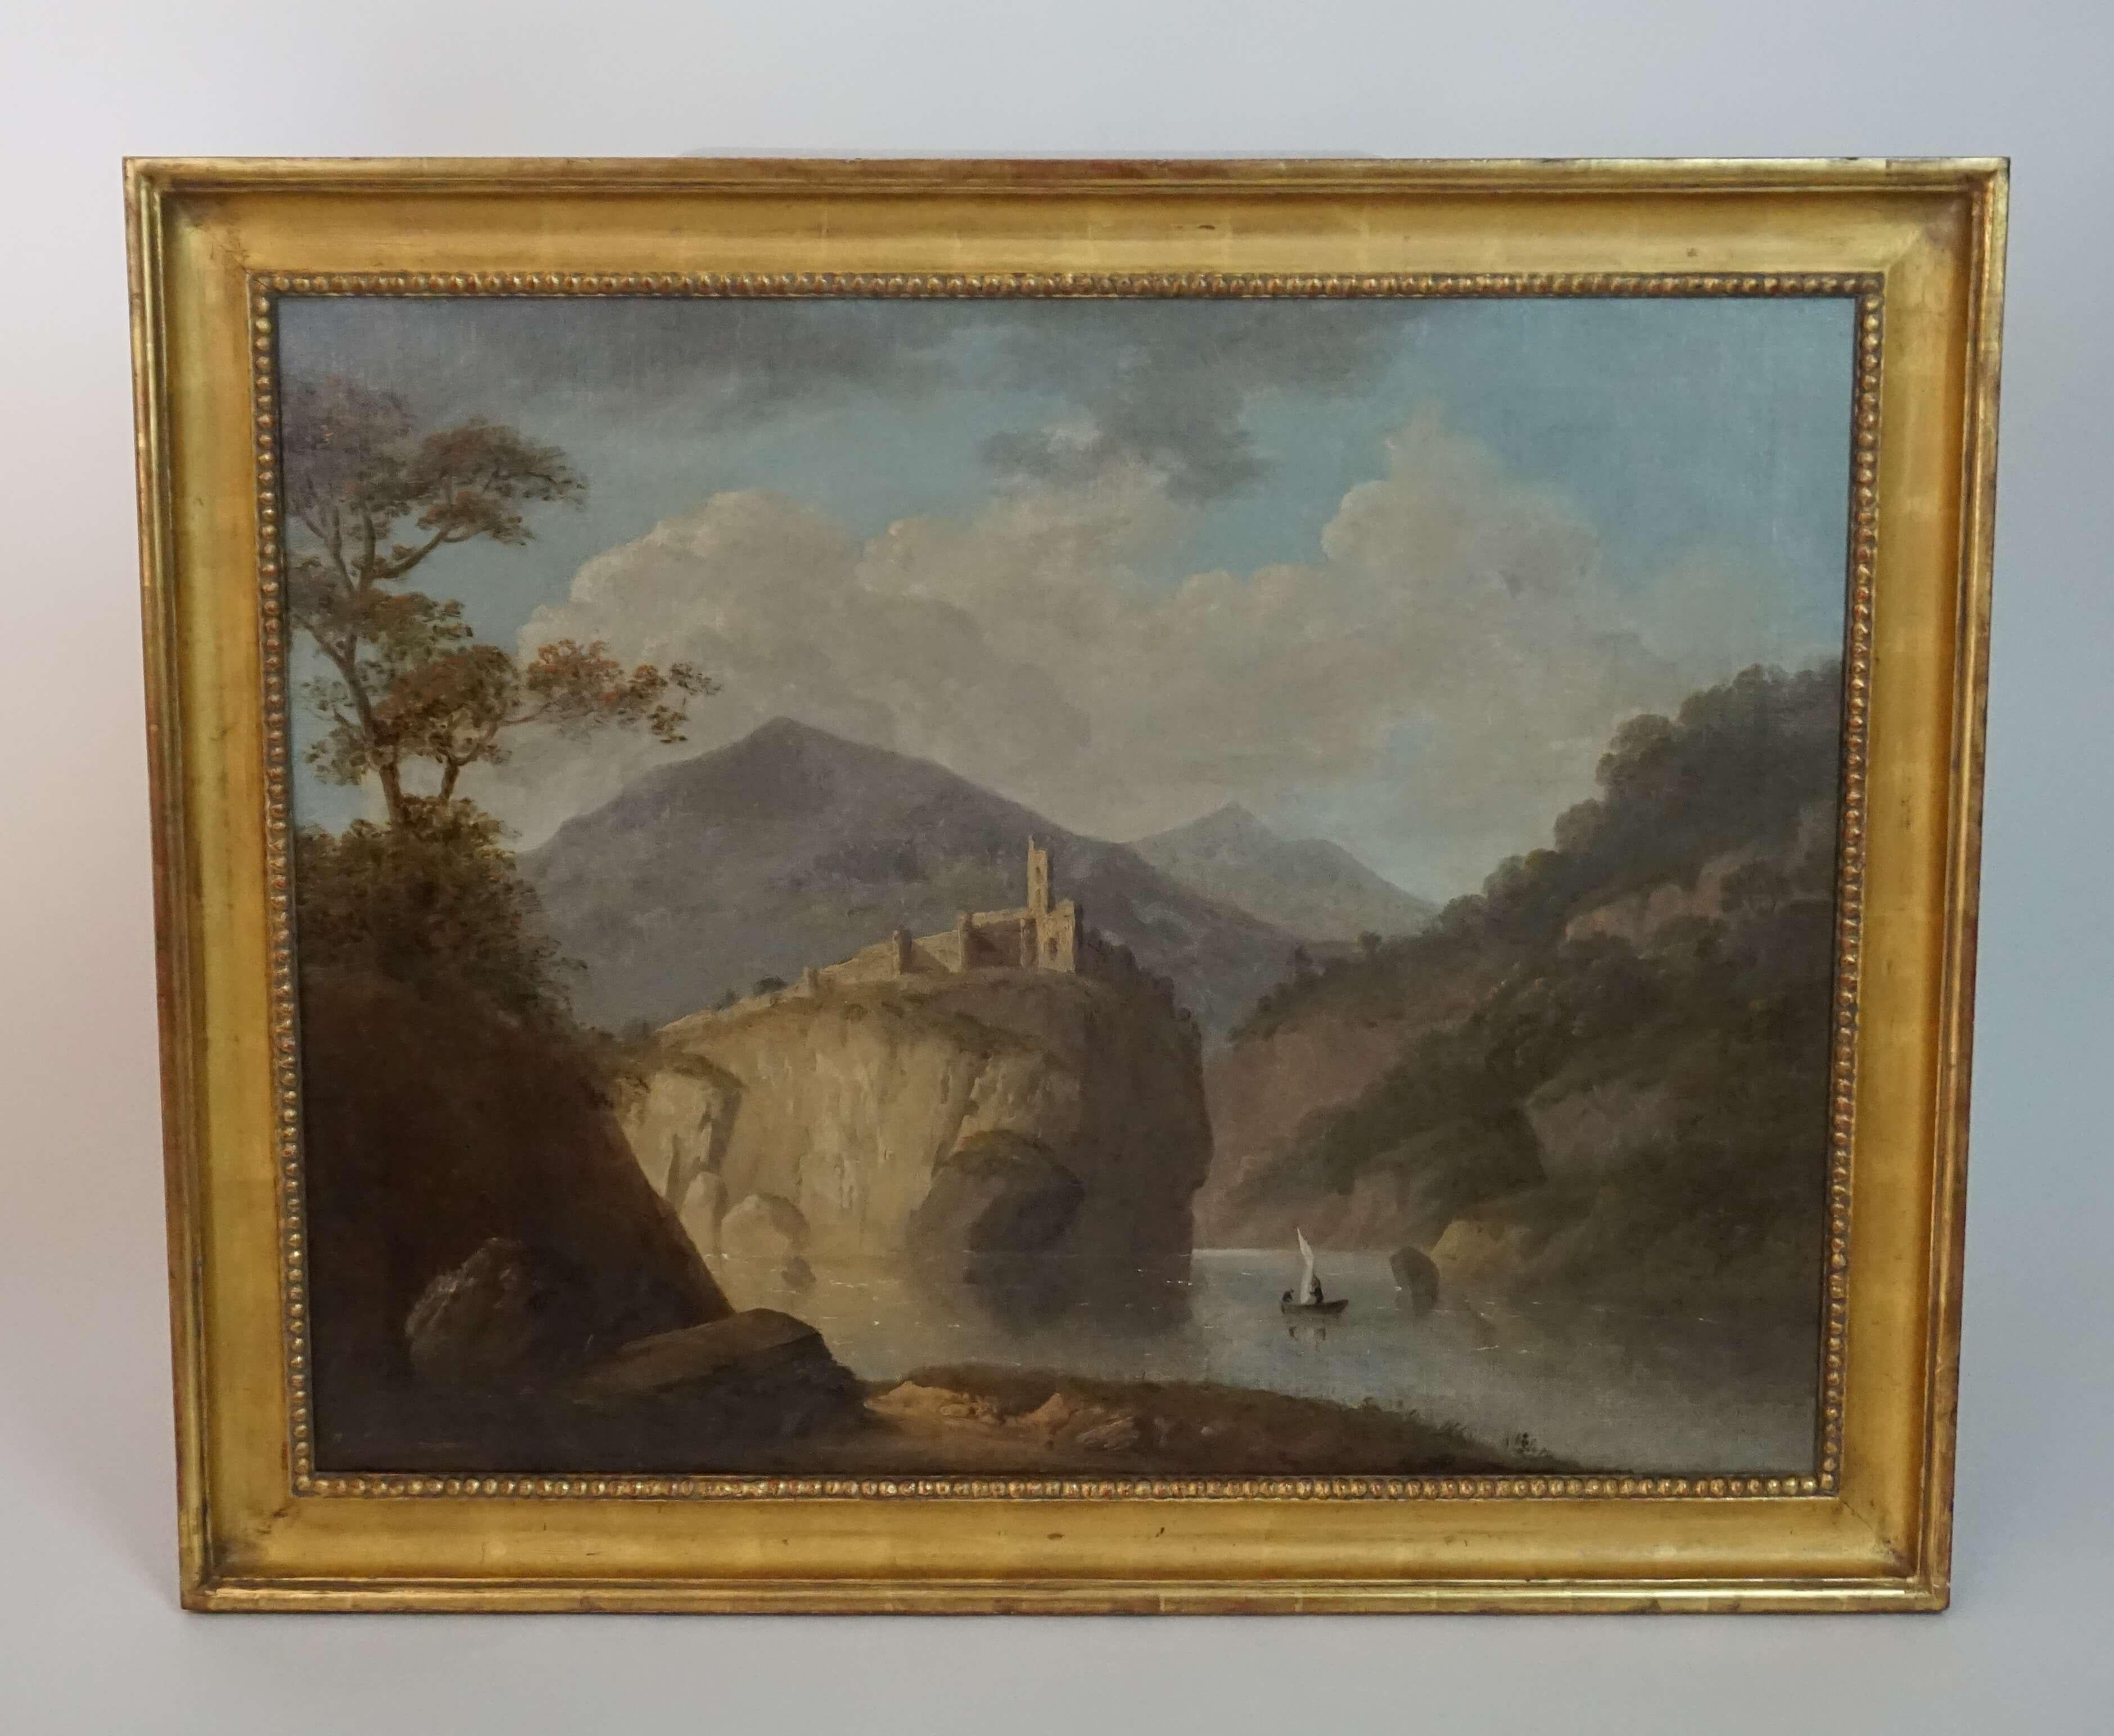 Oil on canvas painting by prominent British landscape painter Robert Freebairn (signed lower left) depicting a dramatized view of Dolbadarn Castle rising above lake Llyn Peris with Mount Snowdon in the background, circa 1795. Canvas measures 36